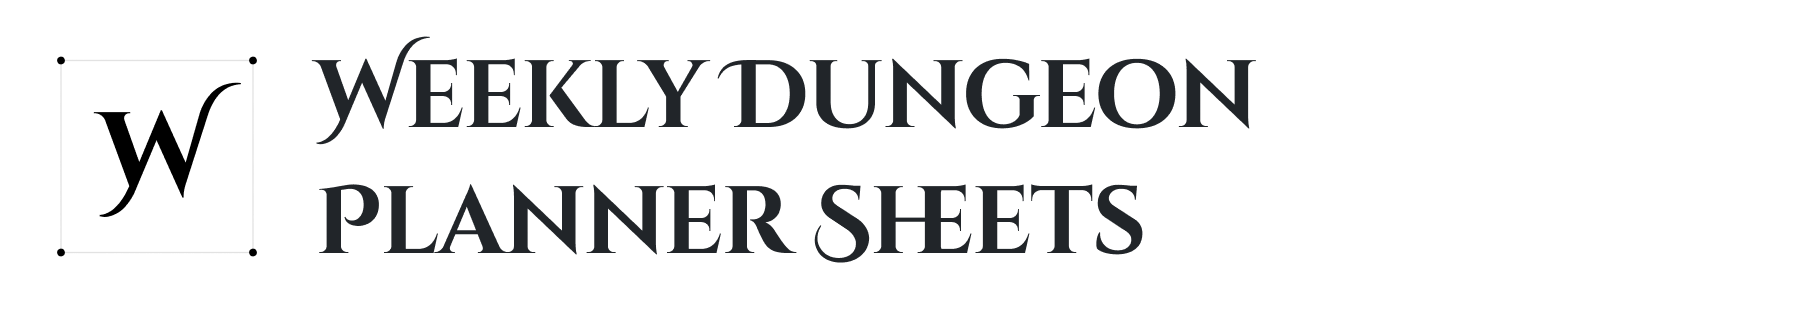 Weekly Dungeon Planner Sheets